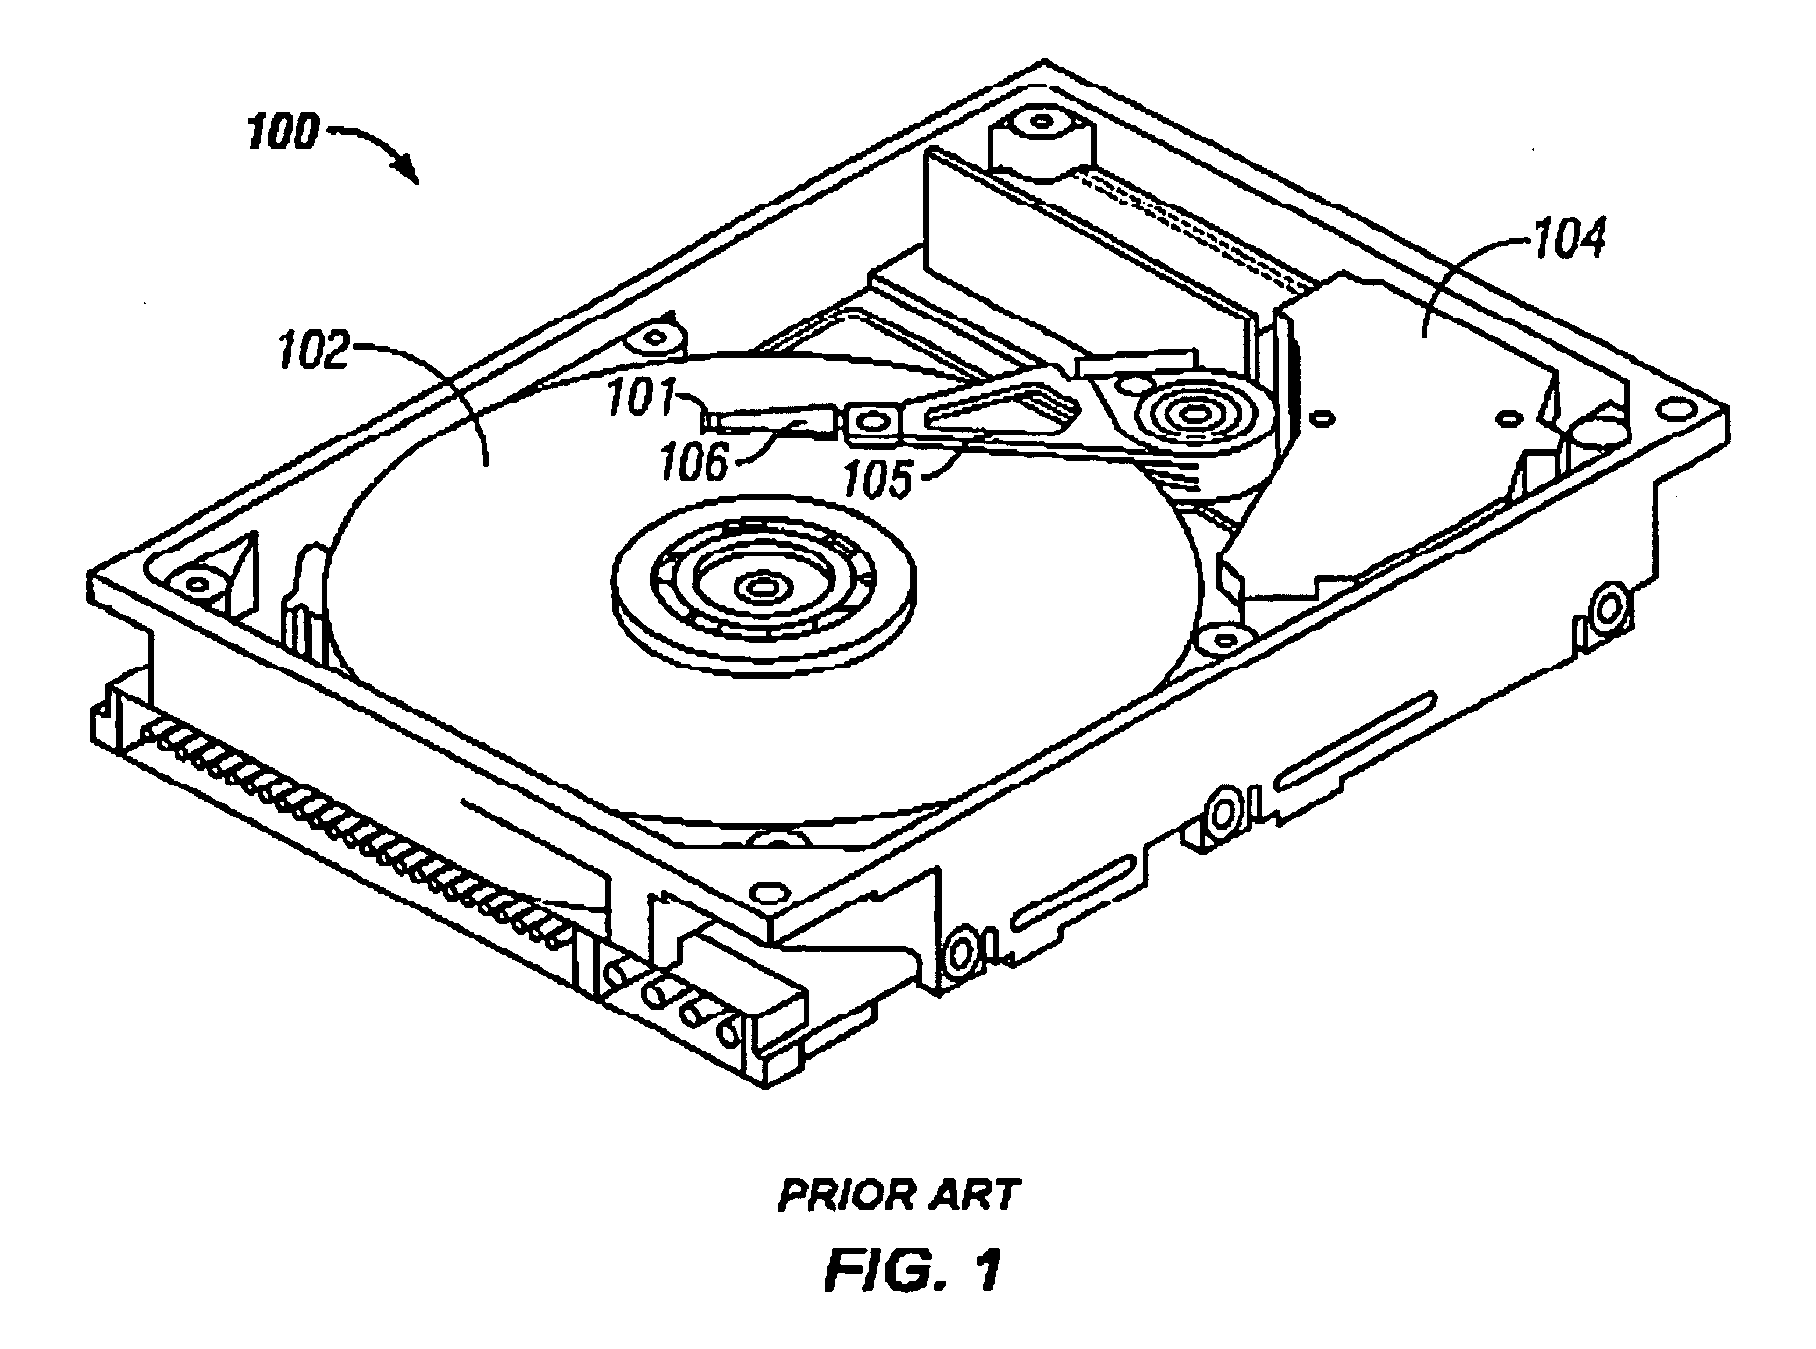 Method for actively controlling electric potential at the head/disk interface of a magnetic recording disk drive